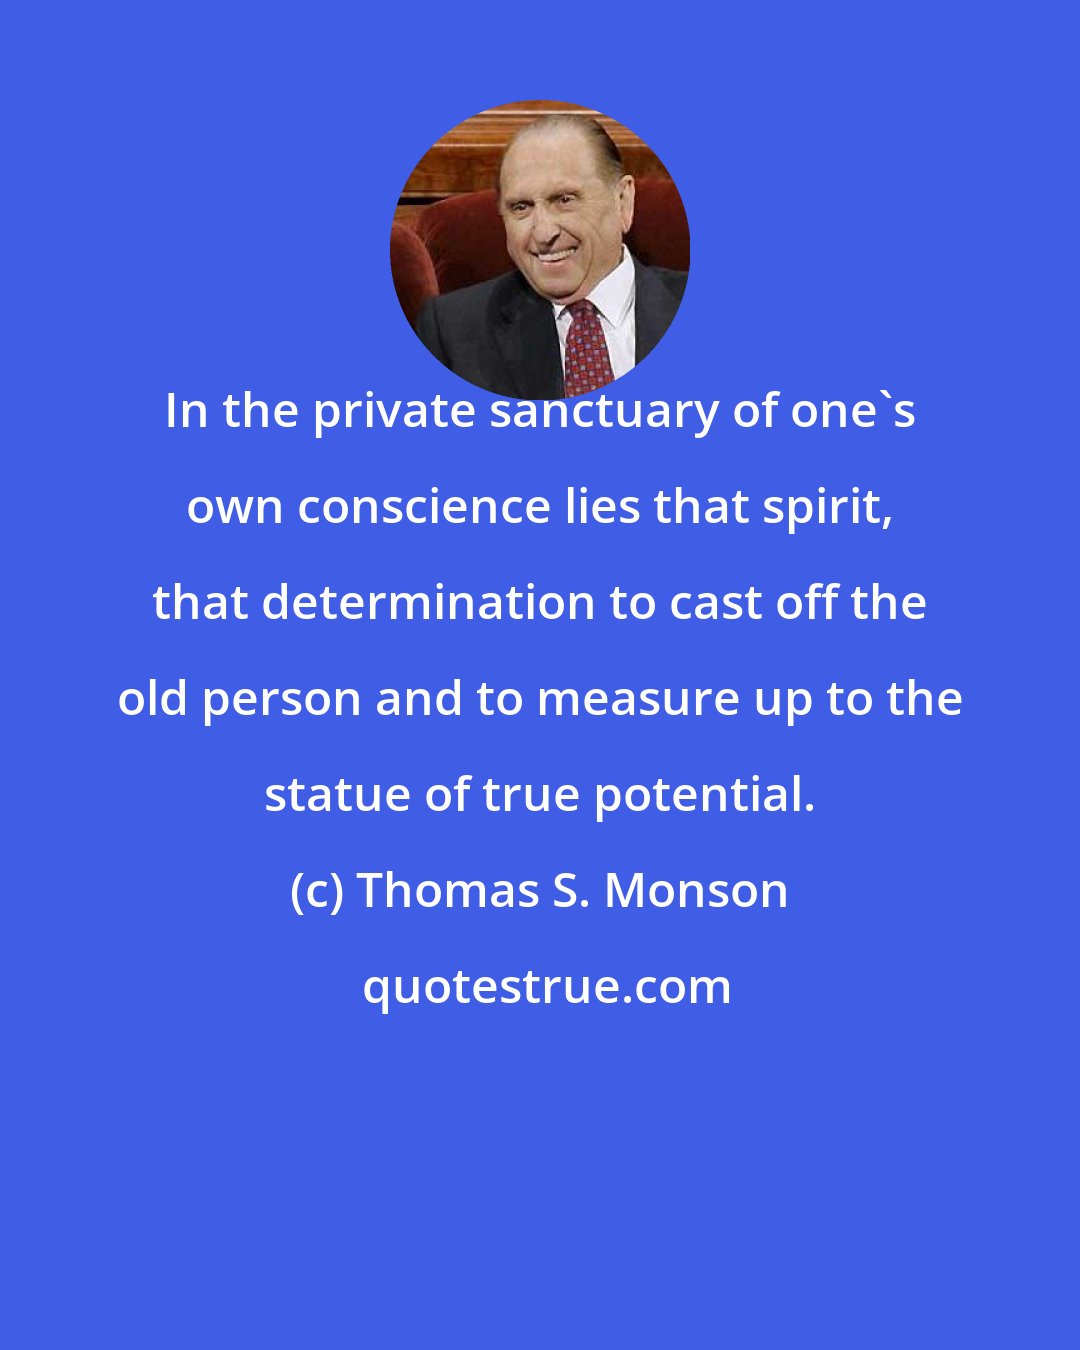 Thomas S. Monson: In the private sanctuary of one's own conscience lies that spirit, that determination to cast off the old person and to measure up to the statue of true potential.